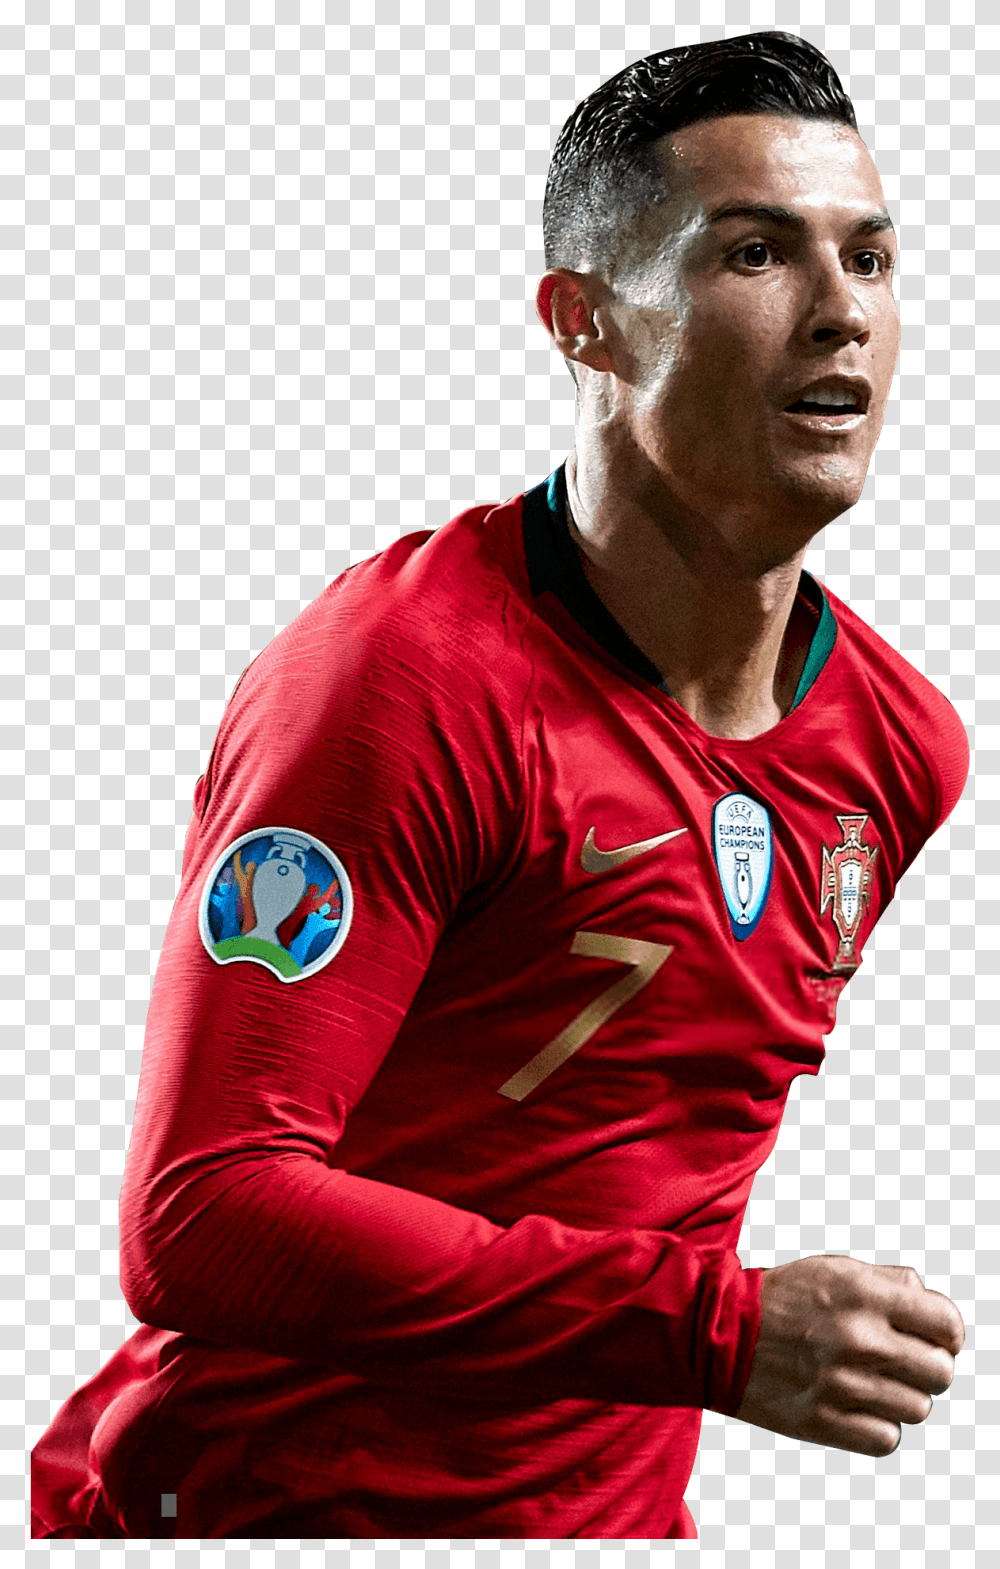 Cristiano Ronaldo Football Render 53132 Footyrenders Cristiano Ronaldo Portugal 2019, Clothing, Sleeve, Person, Sphere Transparent Png